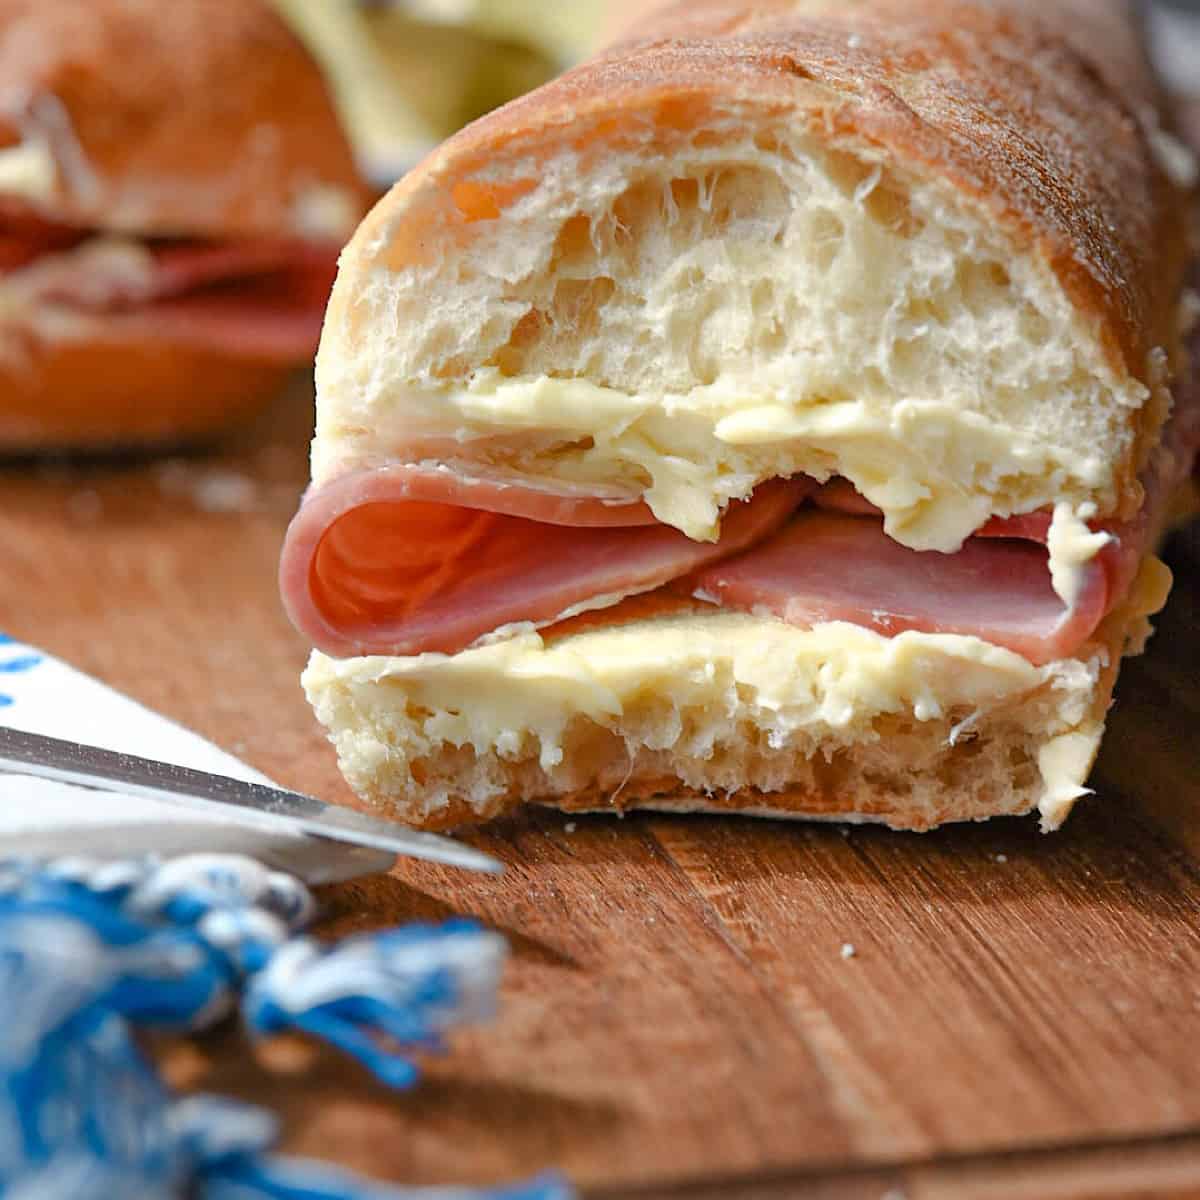 Jambon-beurre-sandwich-featured pic